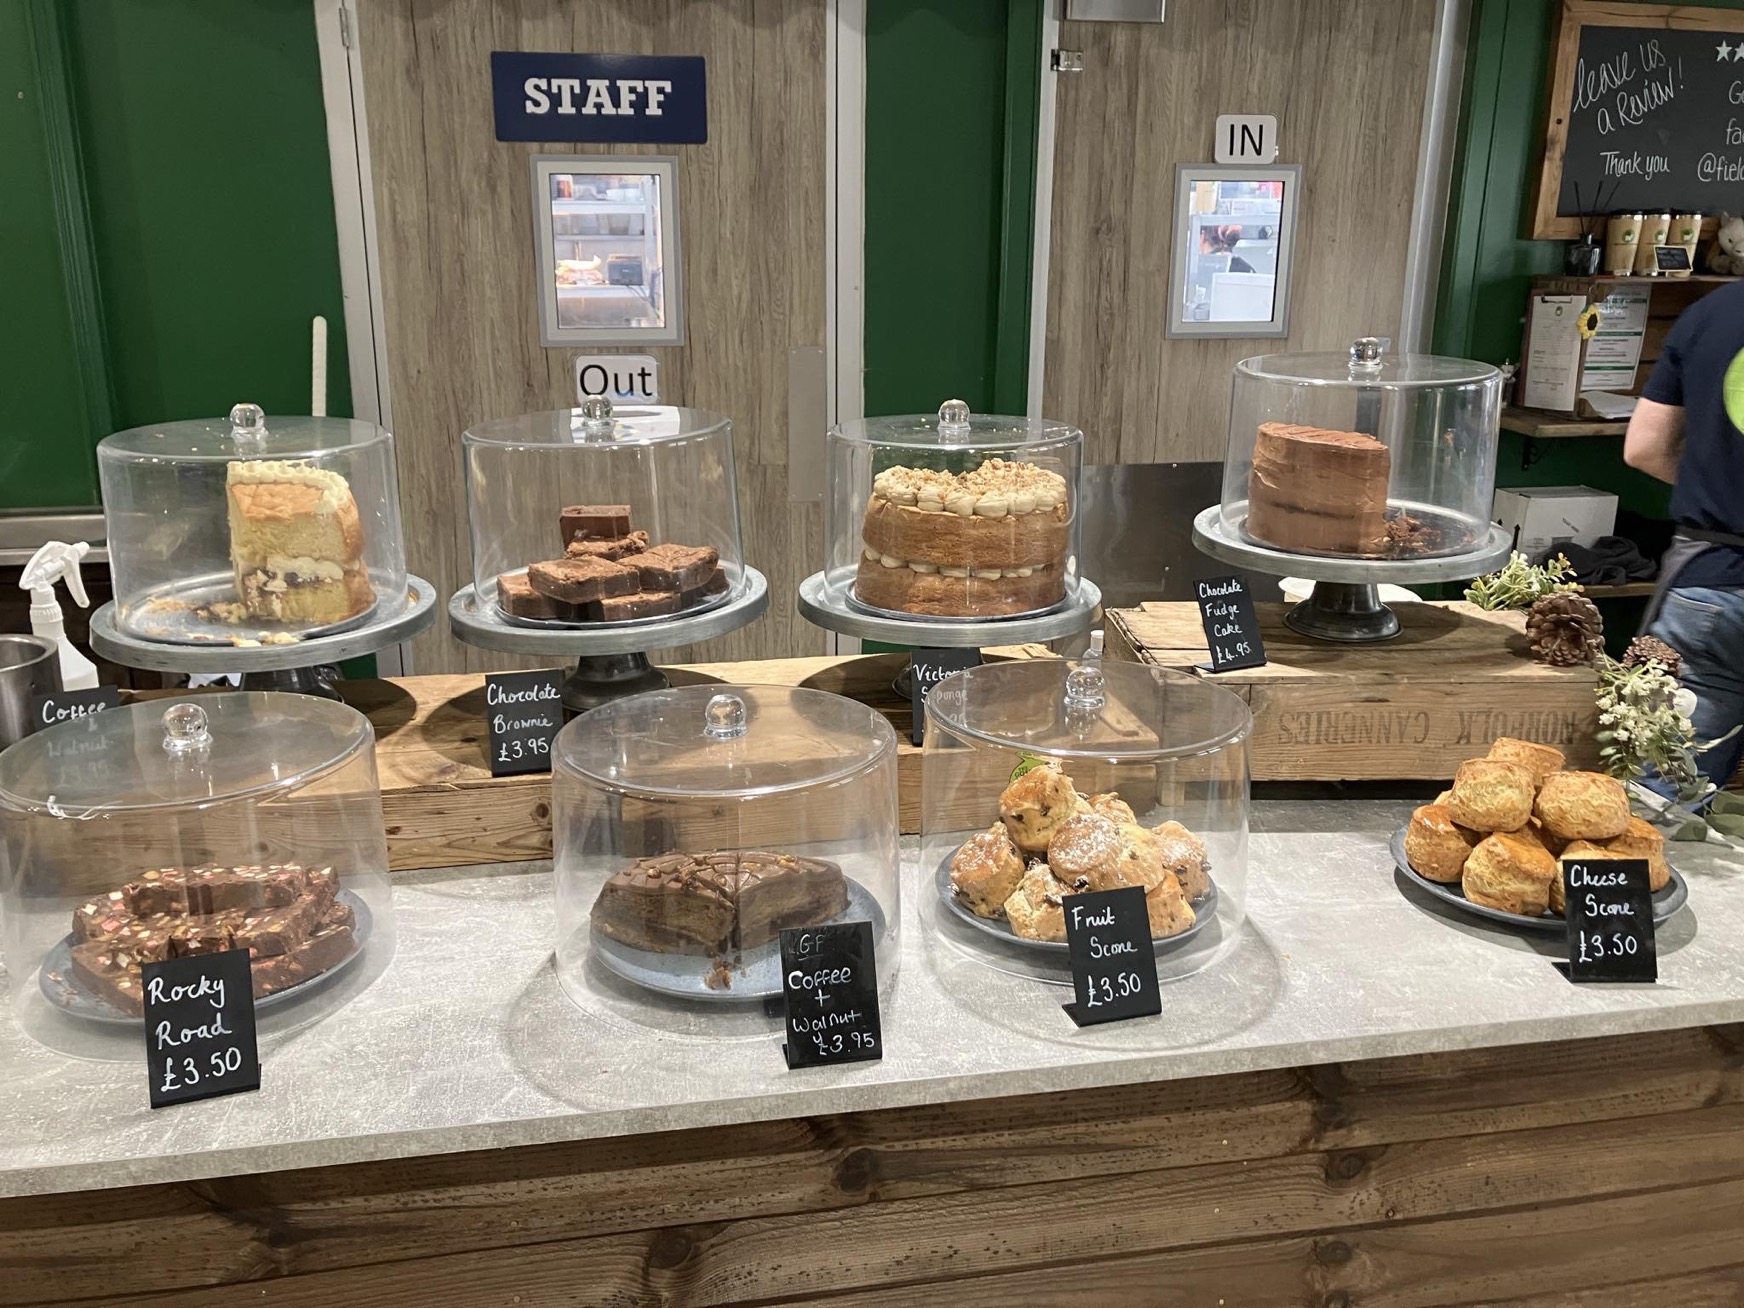 A selection of cakes and sweet baked goods for sale, sitting under glass covers